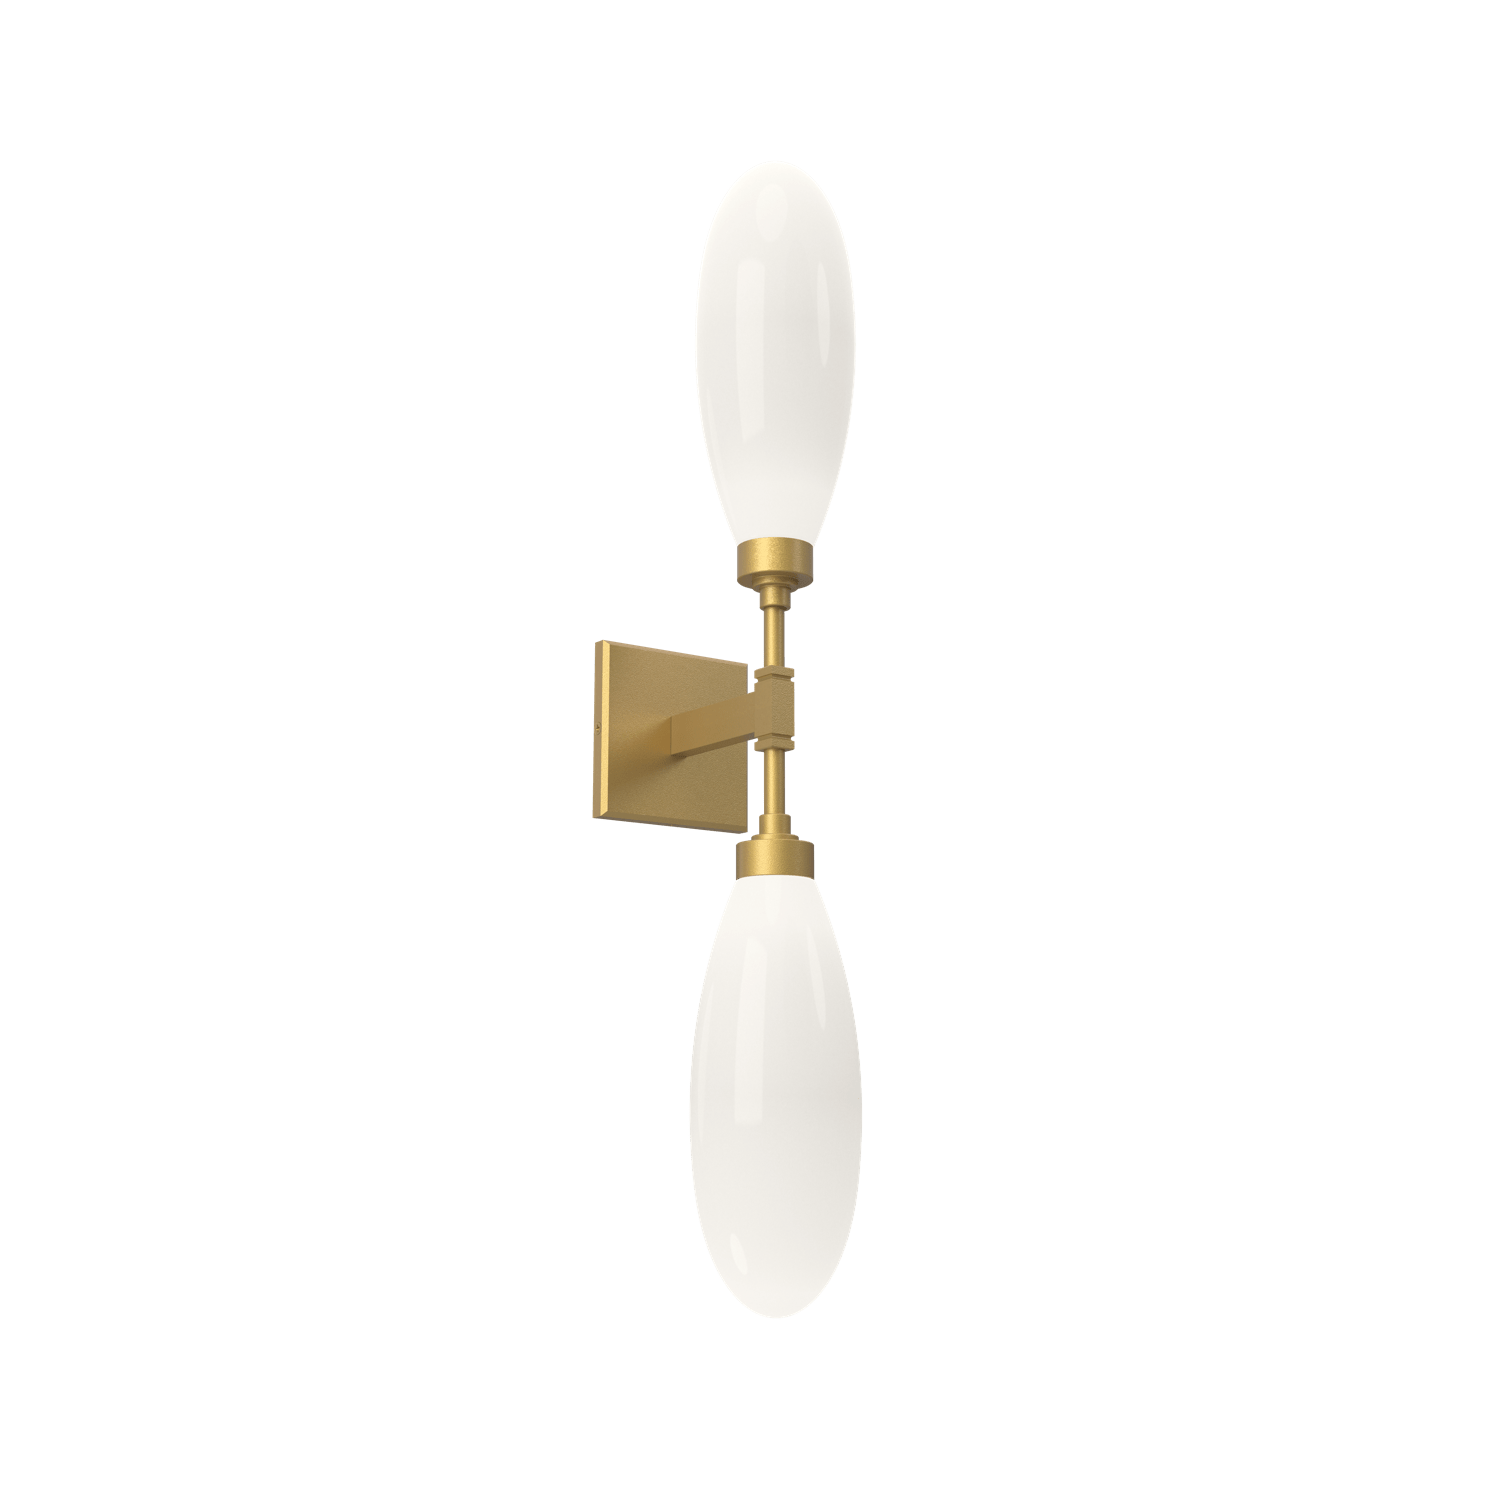 IDB0071-02-GB-WL-LL-Hammerton-Studio-Fiori-double-wall-sconce-with-gilded-brass-finish-and-opal-white-glass-shades-and-LED-lamping